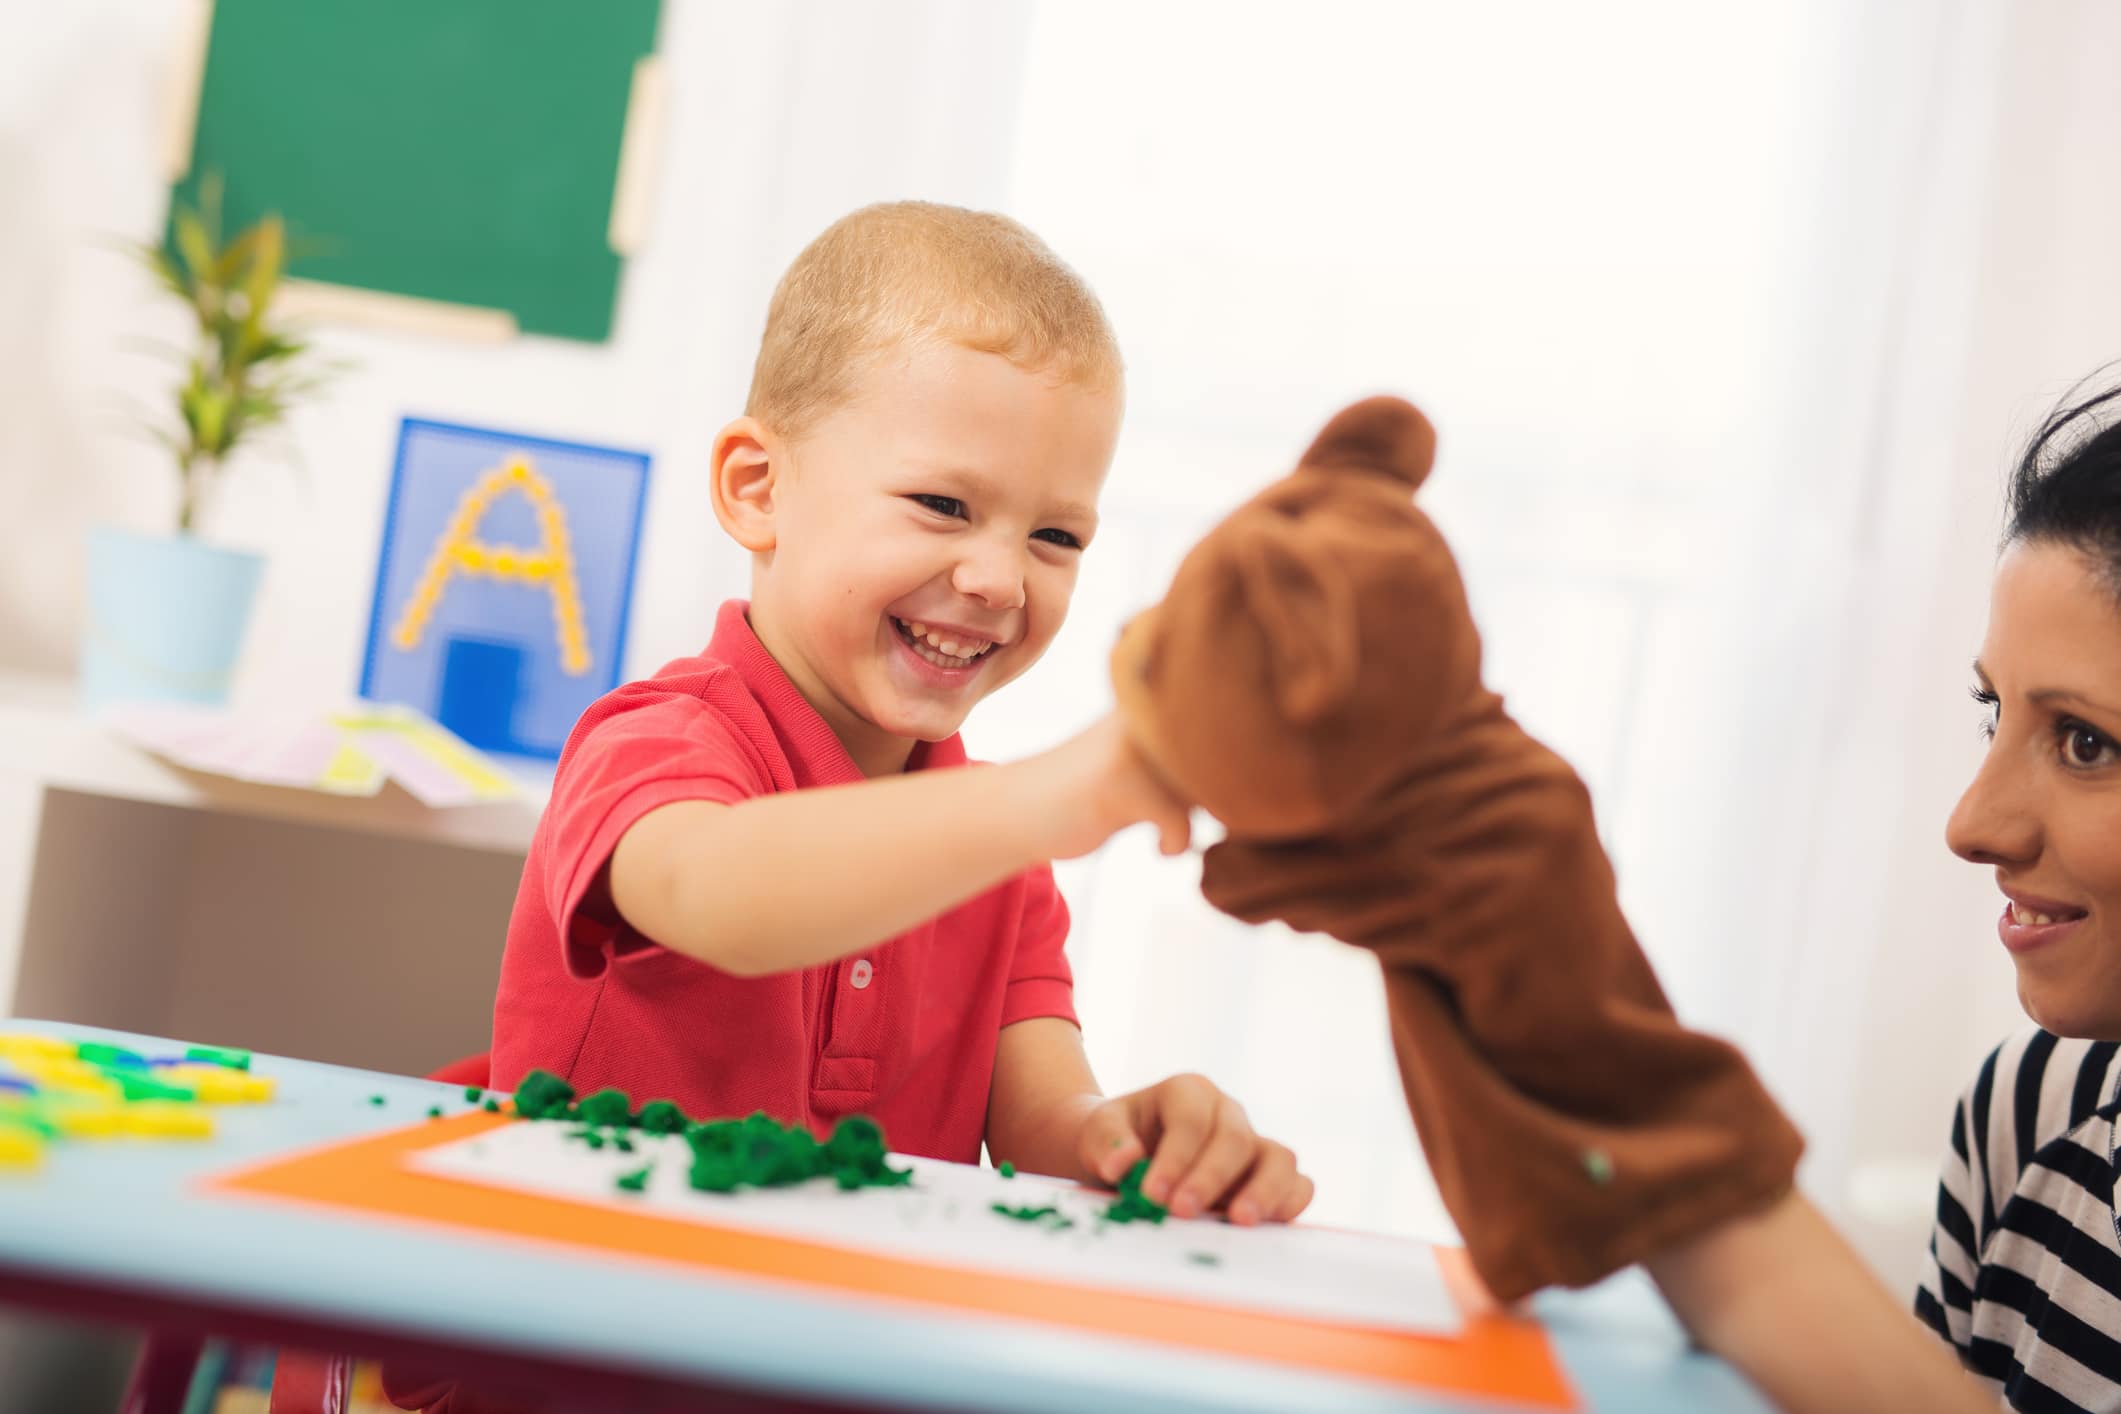 Speech therapist using a puppet to practice speech therapy lessons